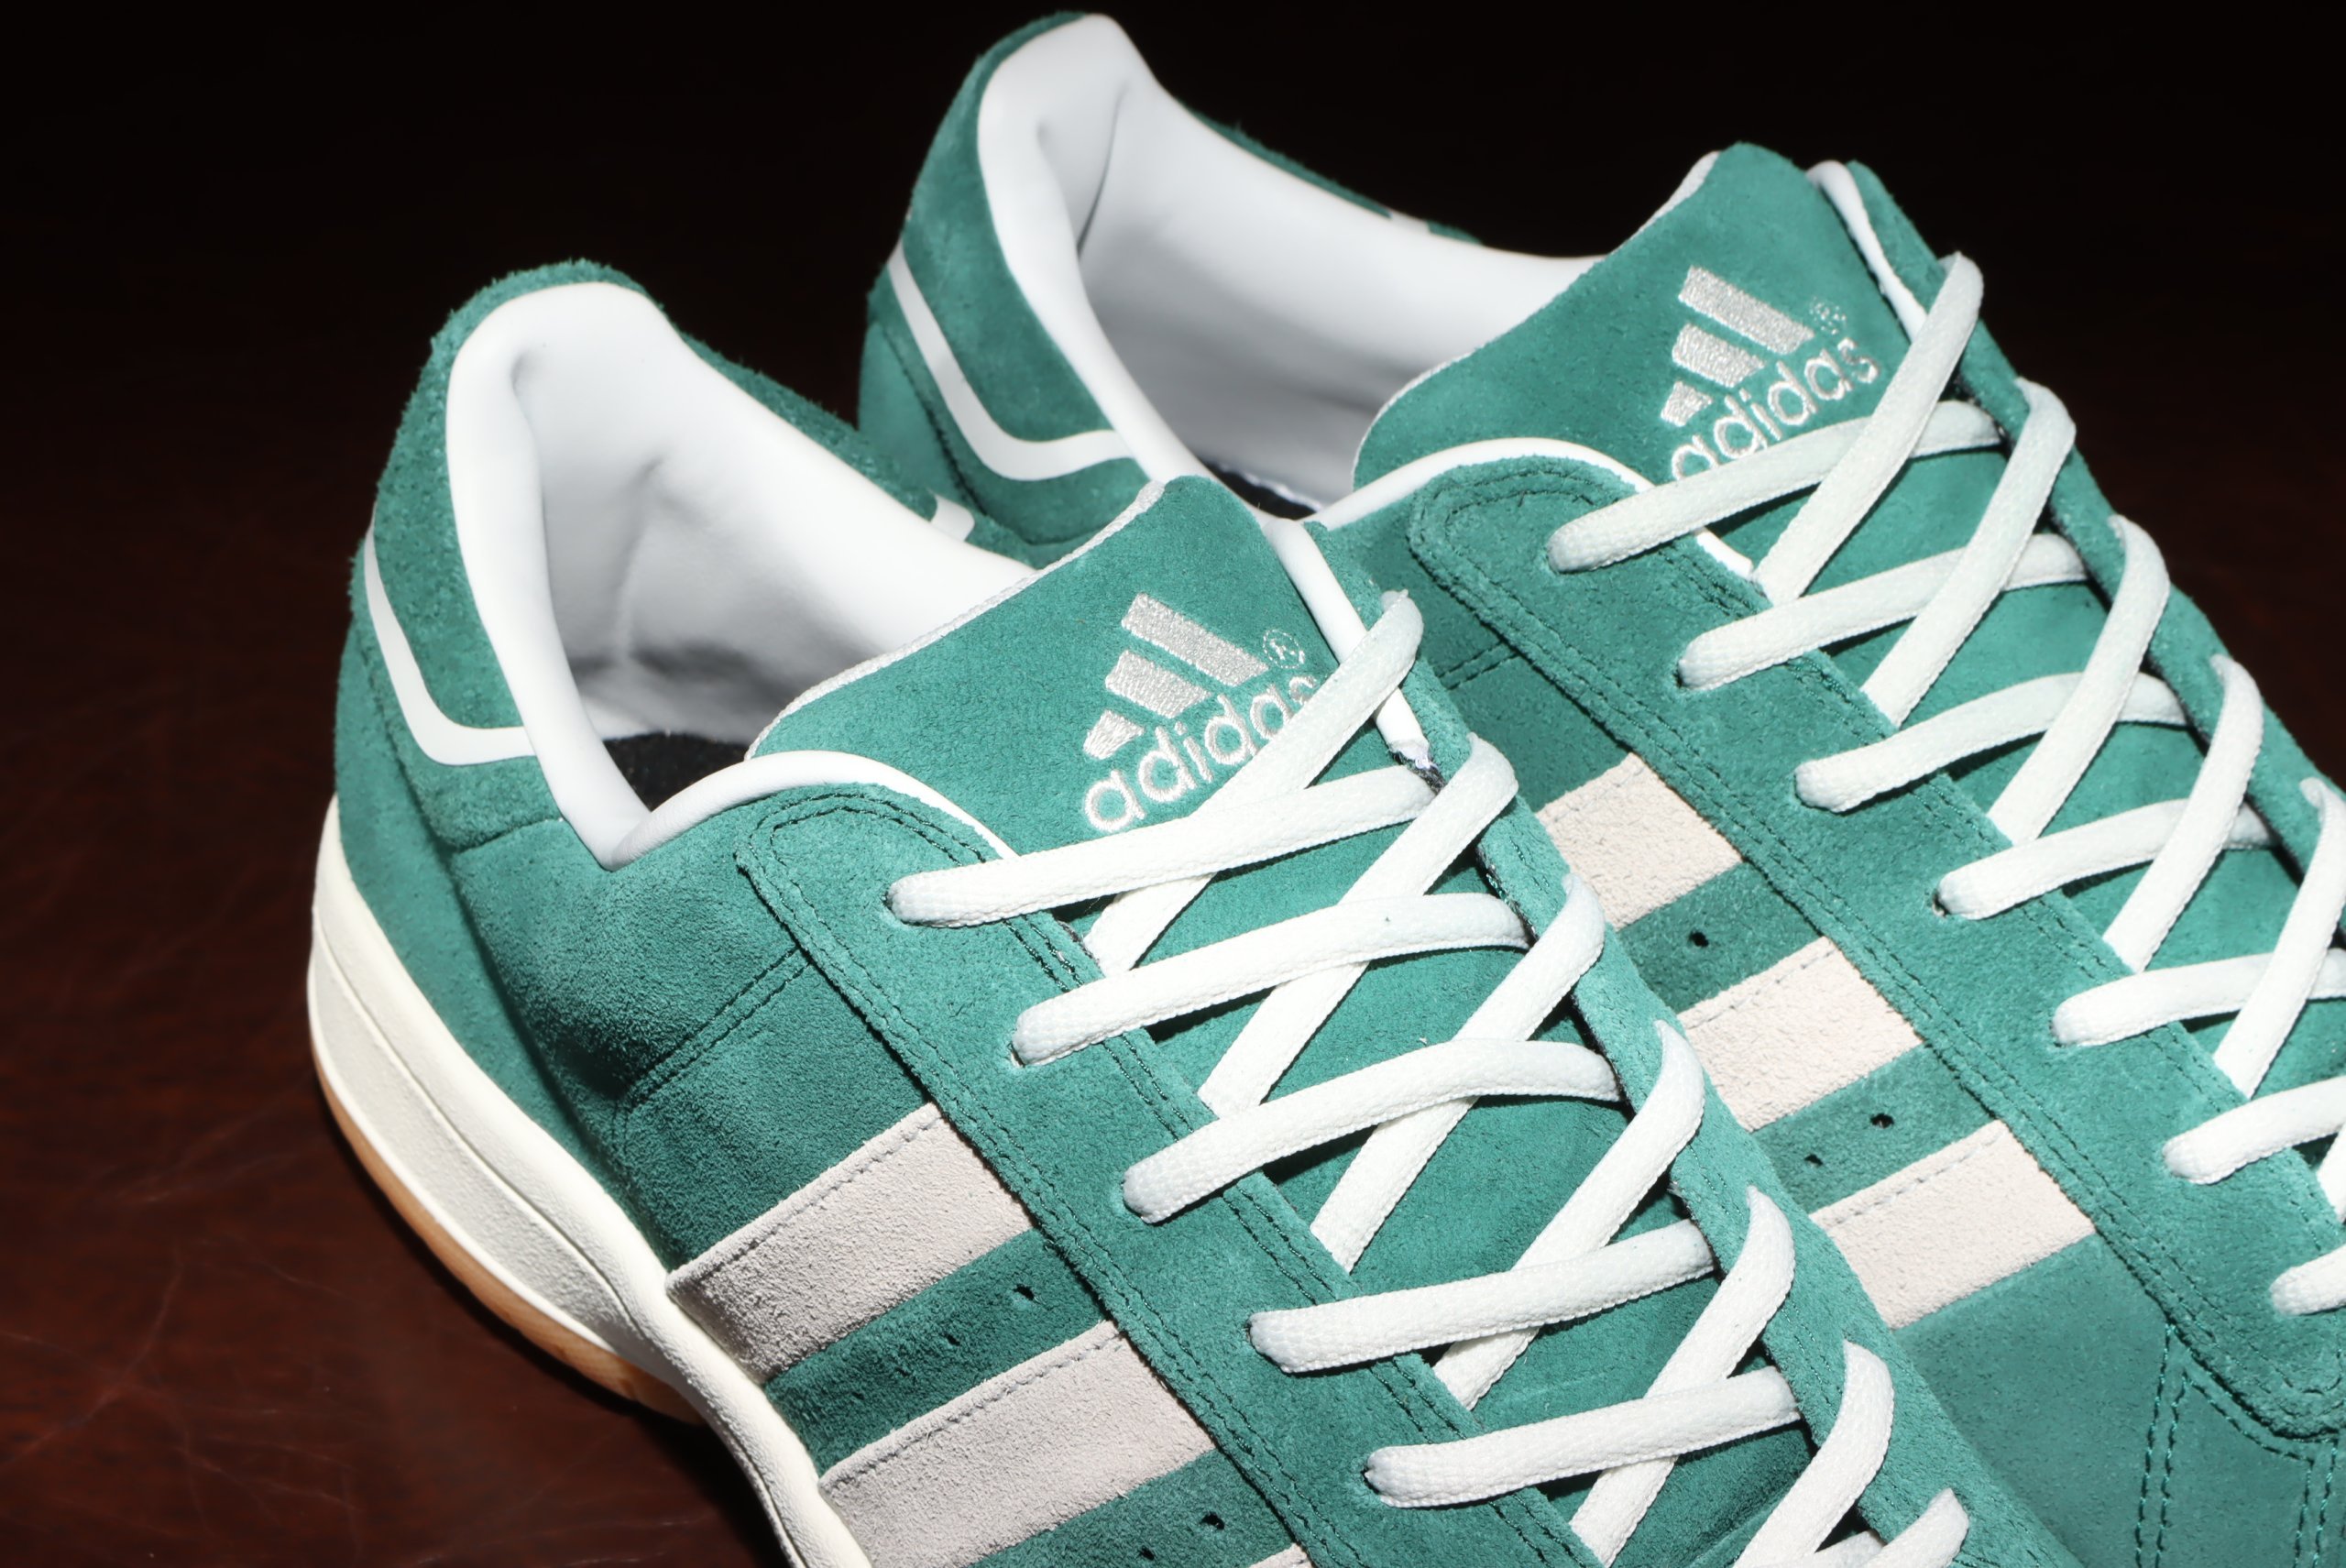 The atmos x adidas Campus Supreme Sole Is Coming to the US - Sneaker Freaker